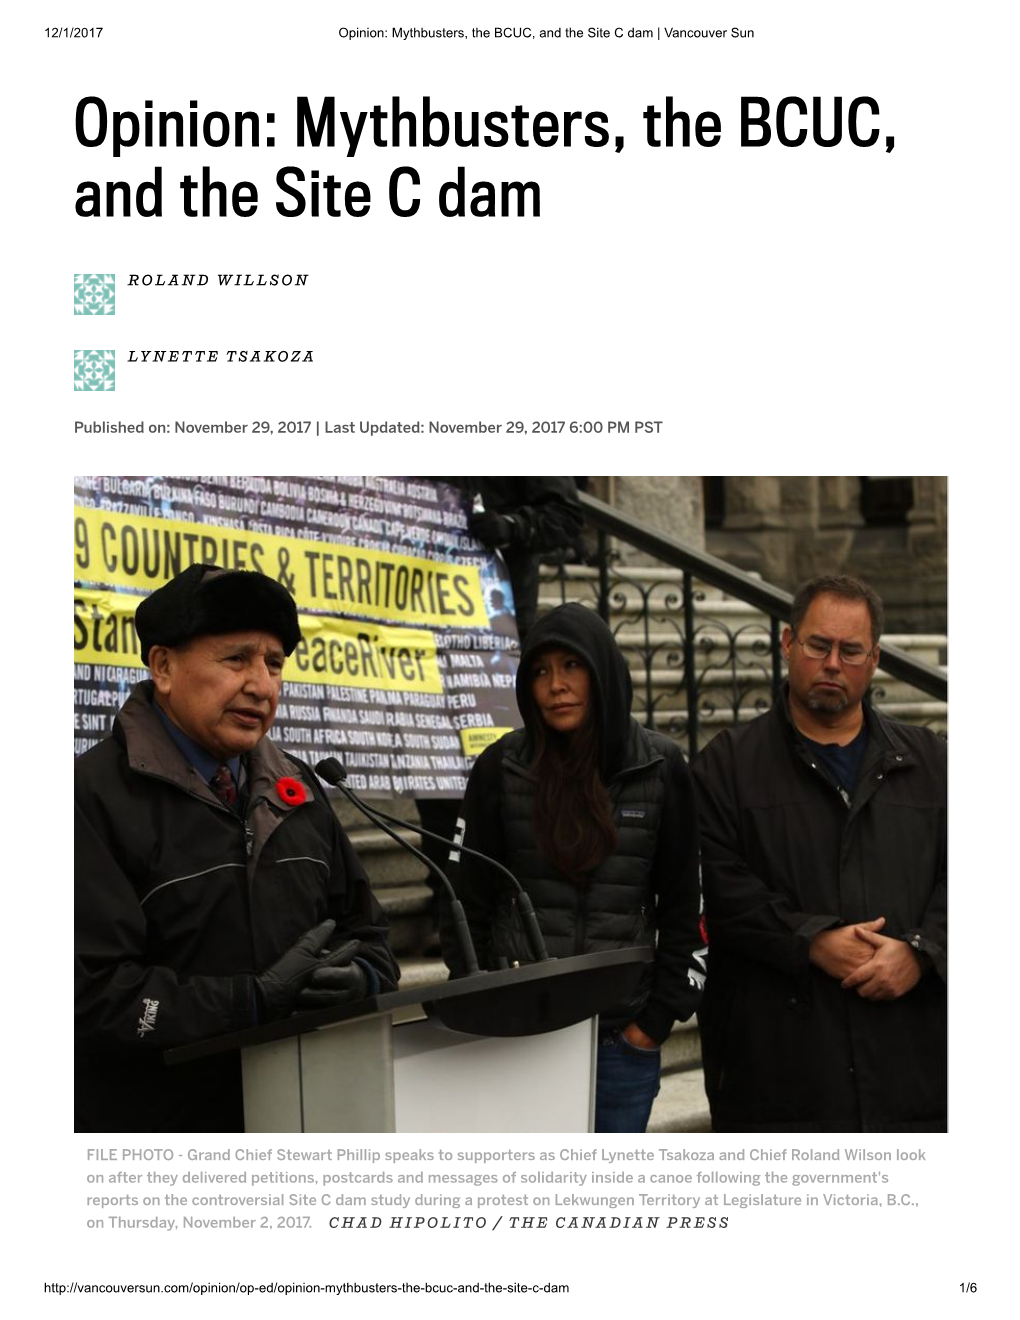 Opinion: Mythbusters, the BCUC, and the Site C Dam | Vancouver Sun Opinion: Mythbusters, the BCUC, and the Site C Dam